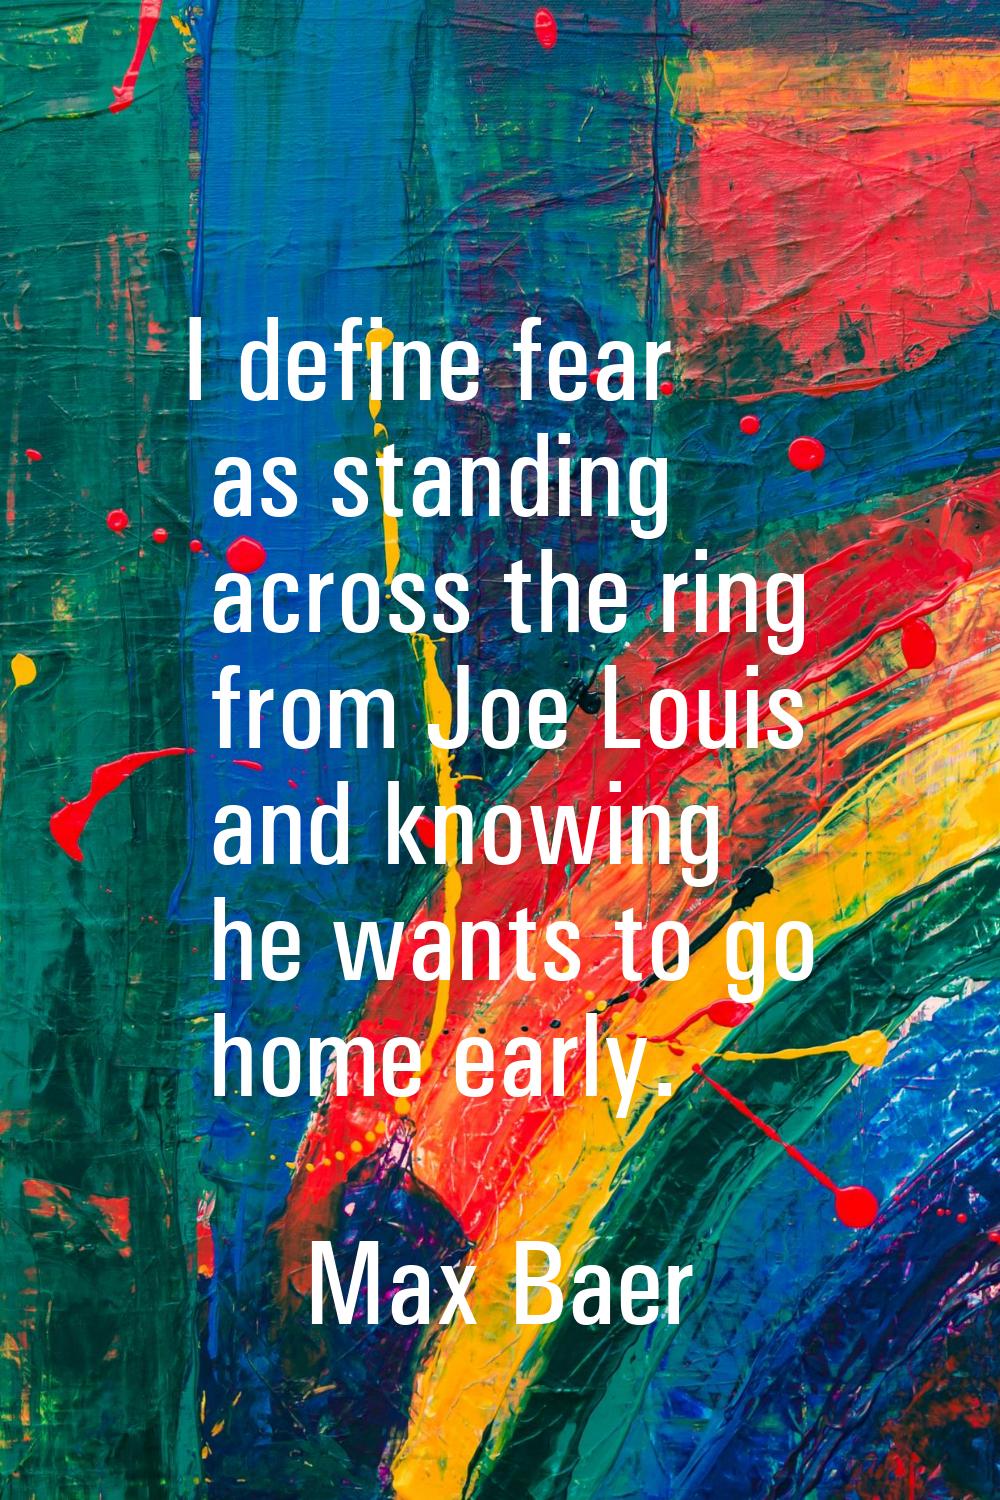 I define fear as standing across the ring from Joe Louis and knowing he wants to go home early.